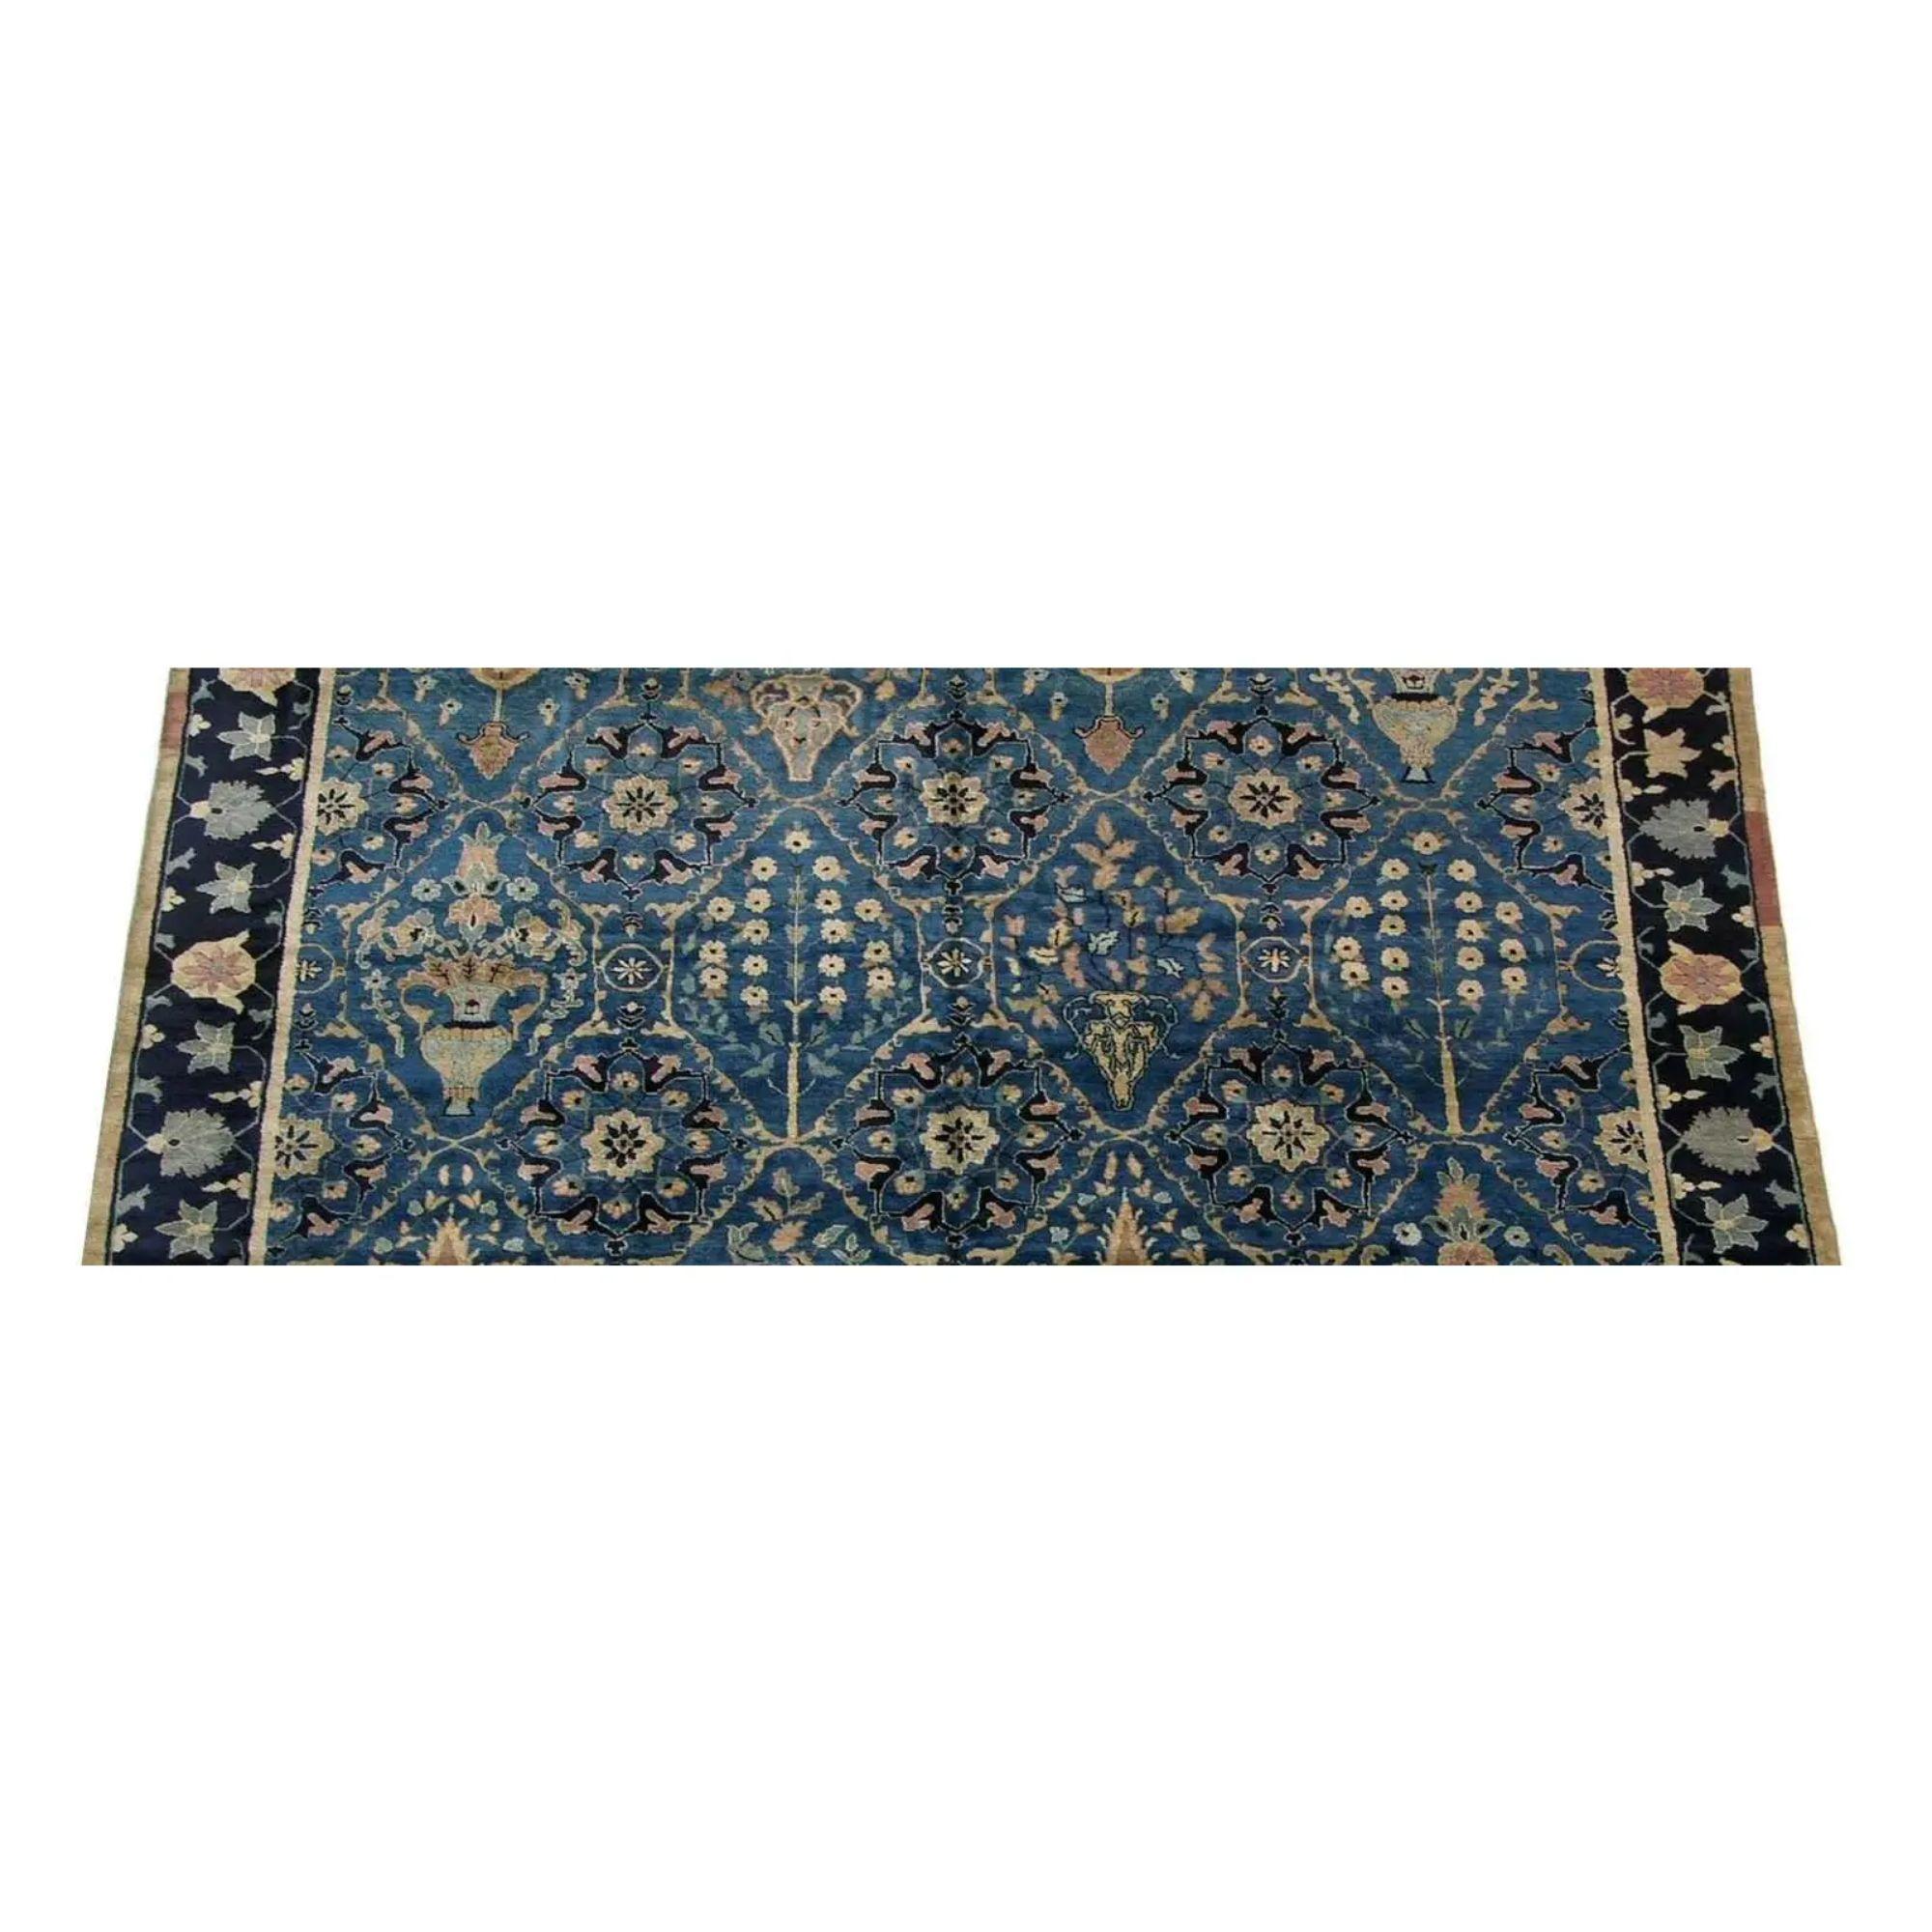 1990s Vintage Decorative Chinese Rug with Floral Design 10′2″ × 11′2″ In Good Condition For Sale In Los Angeles, US